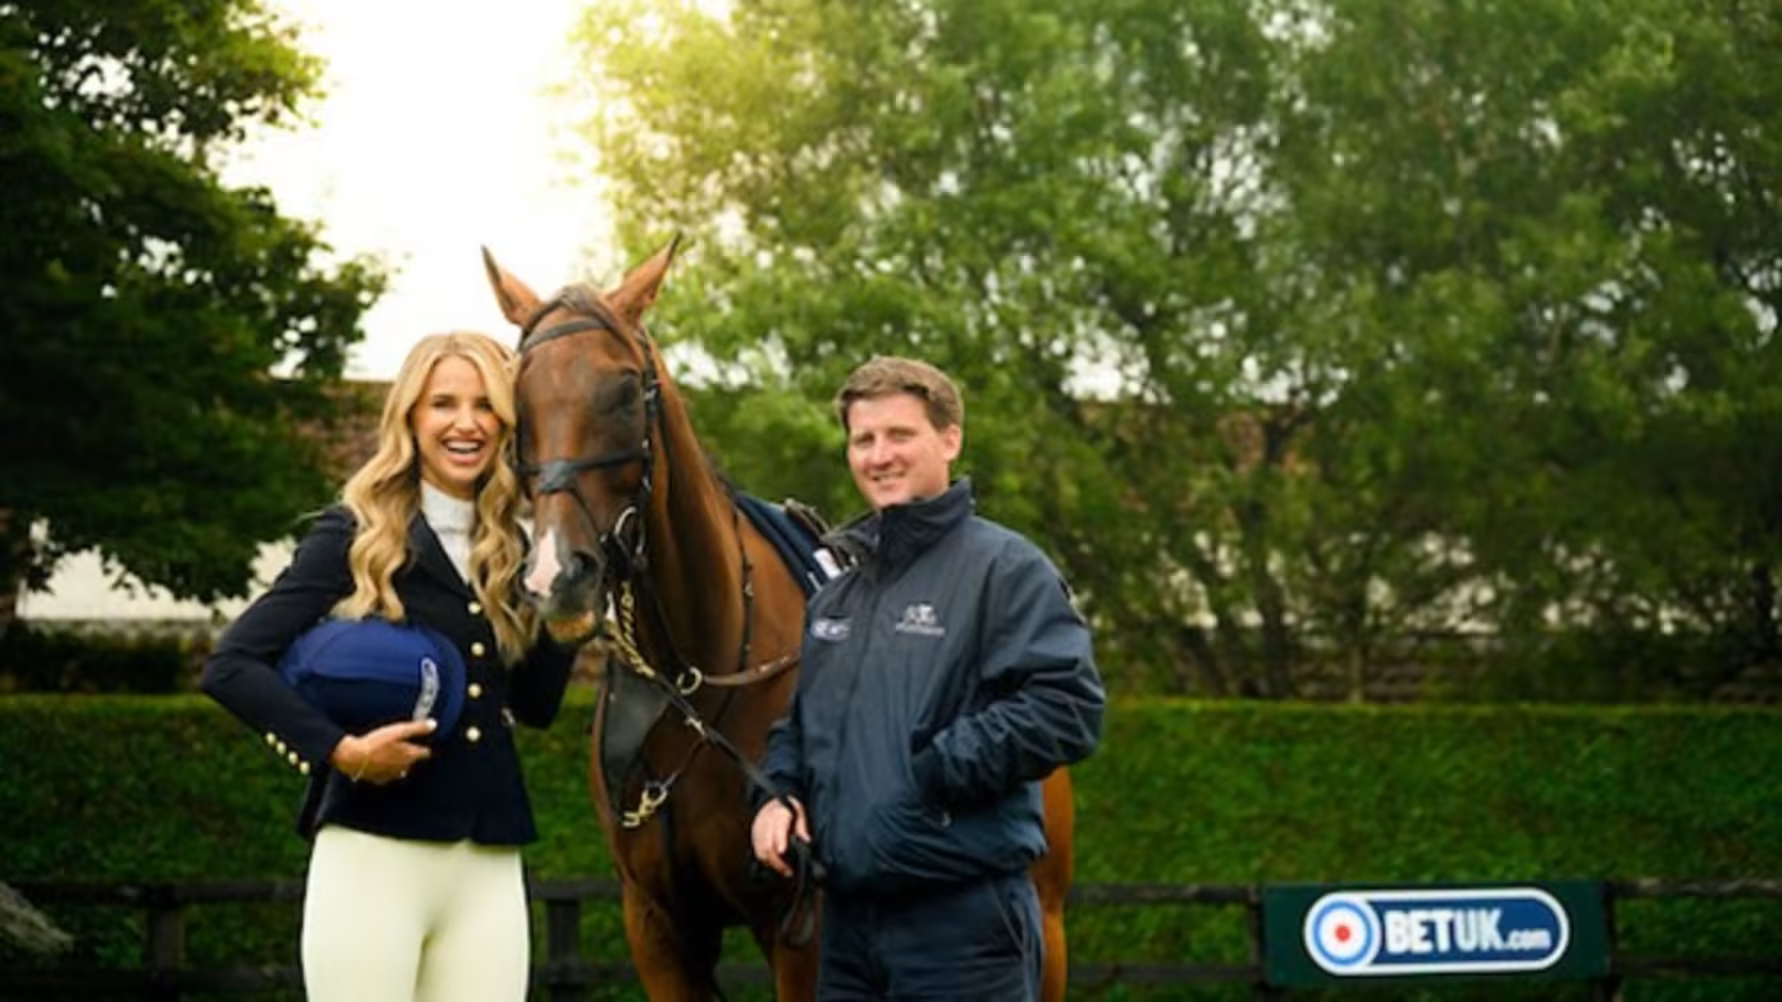 BetUK launches horse racing campaign with Neil Mulholland and Vogue Williams